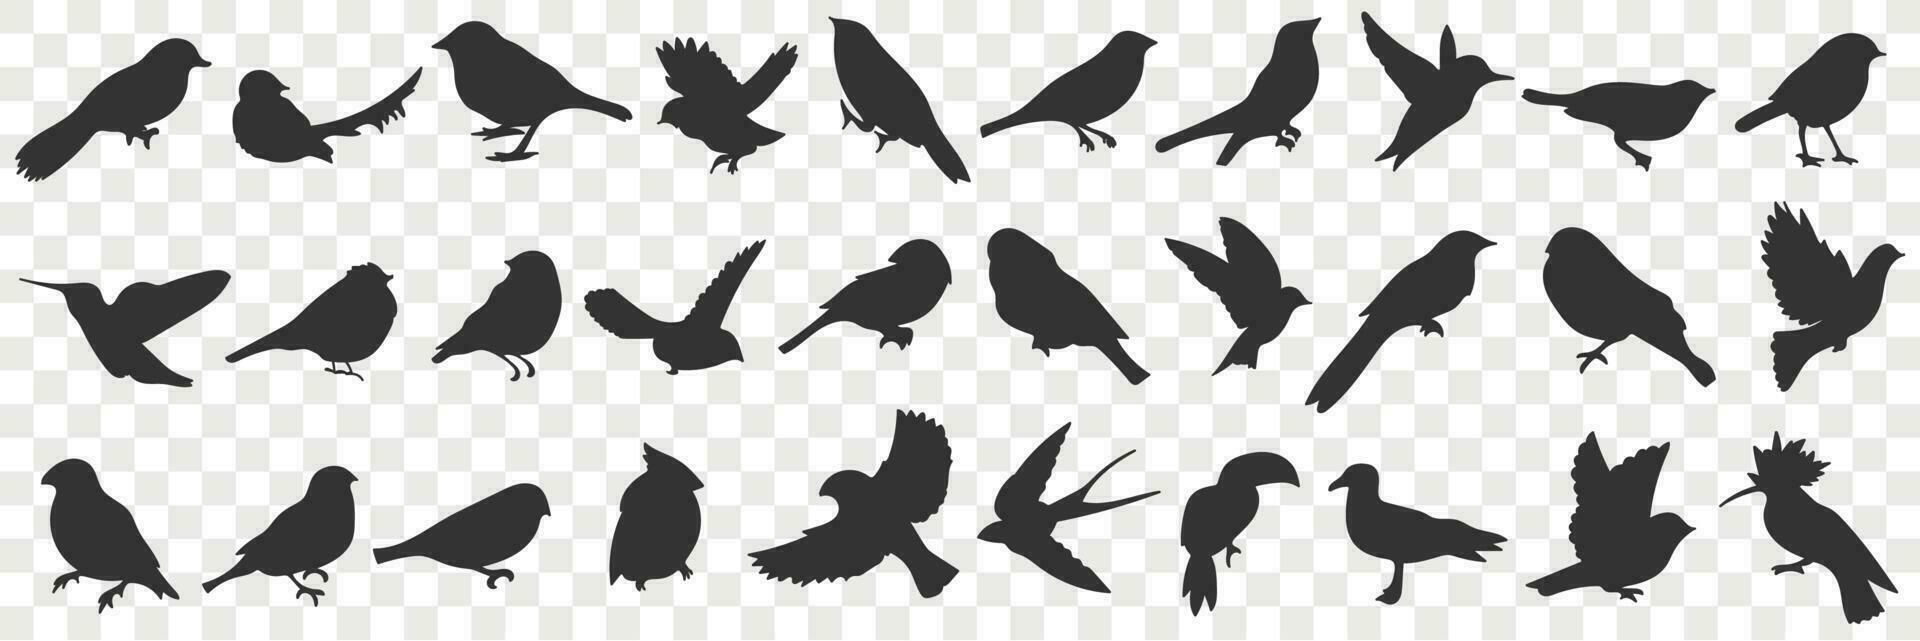 Silhouettes of birds doodle set. Collection of hand drawn various black silhouettes of flying sitting birds with wings in rows on transparent vector